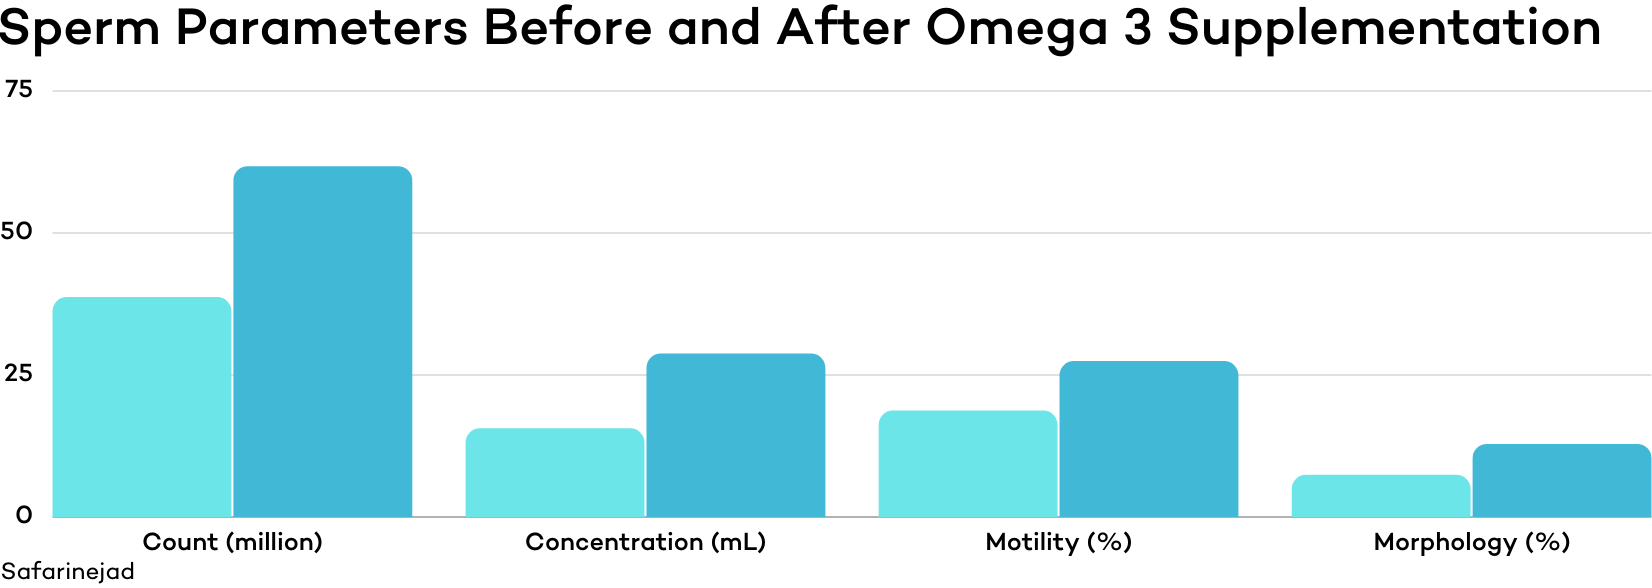 Omega 3s and improving sperm parameters